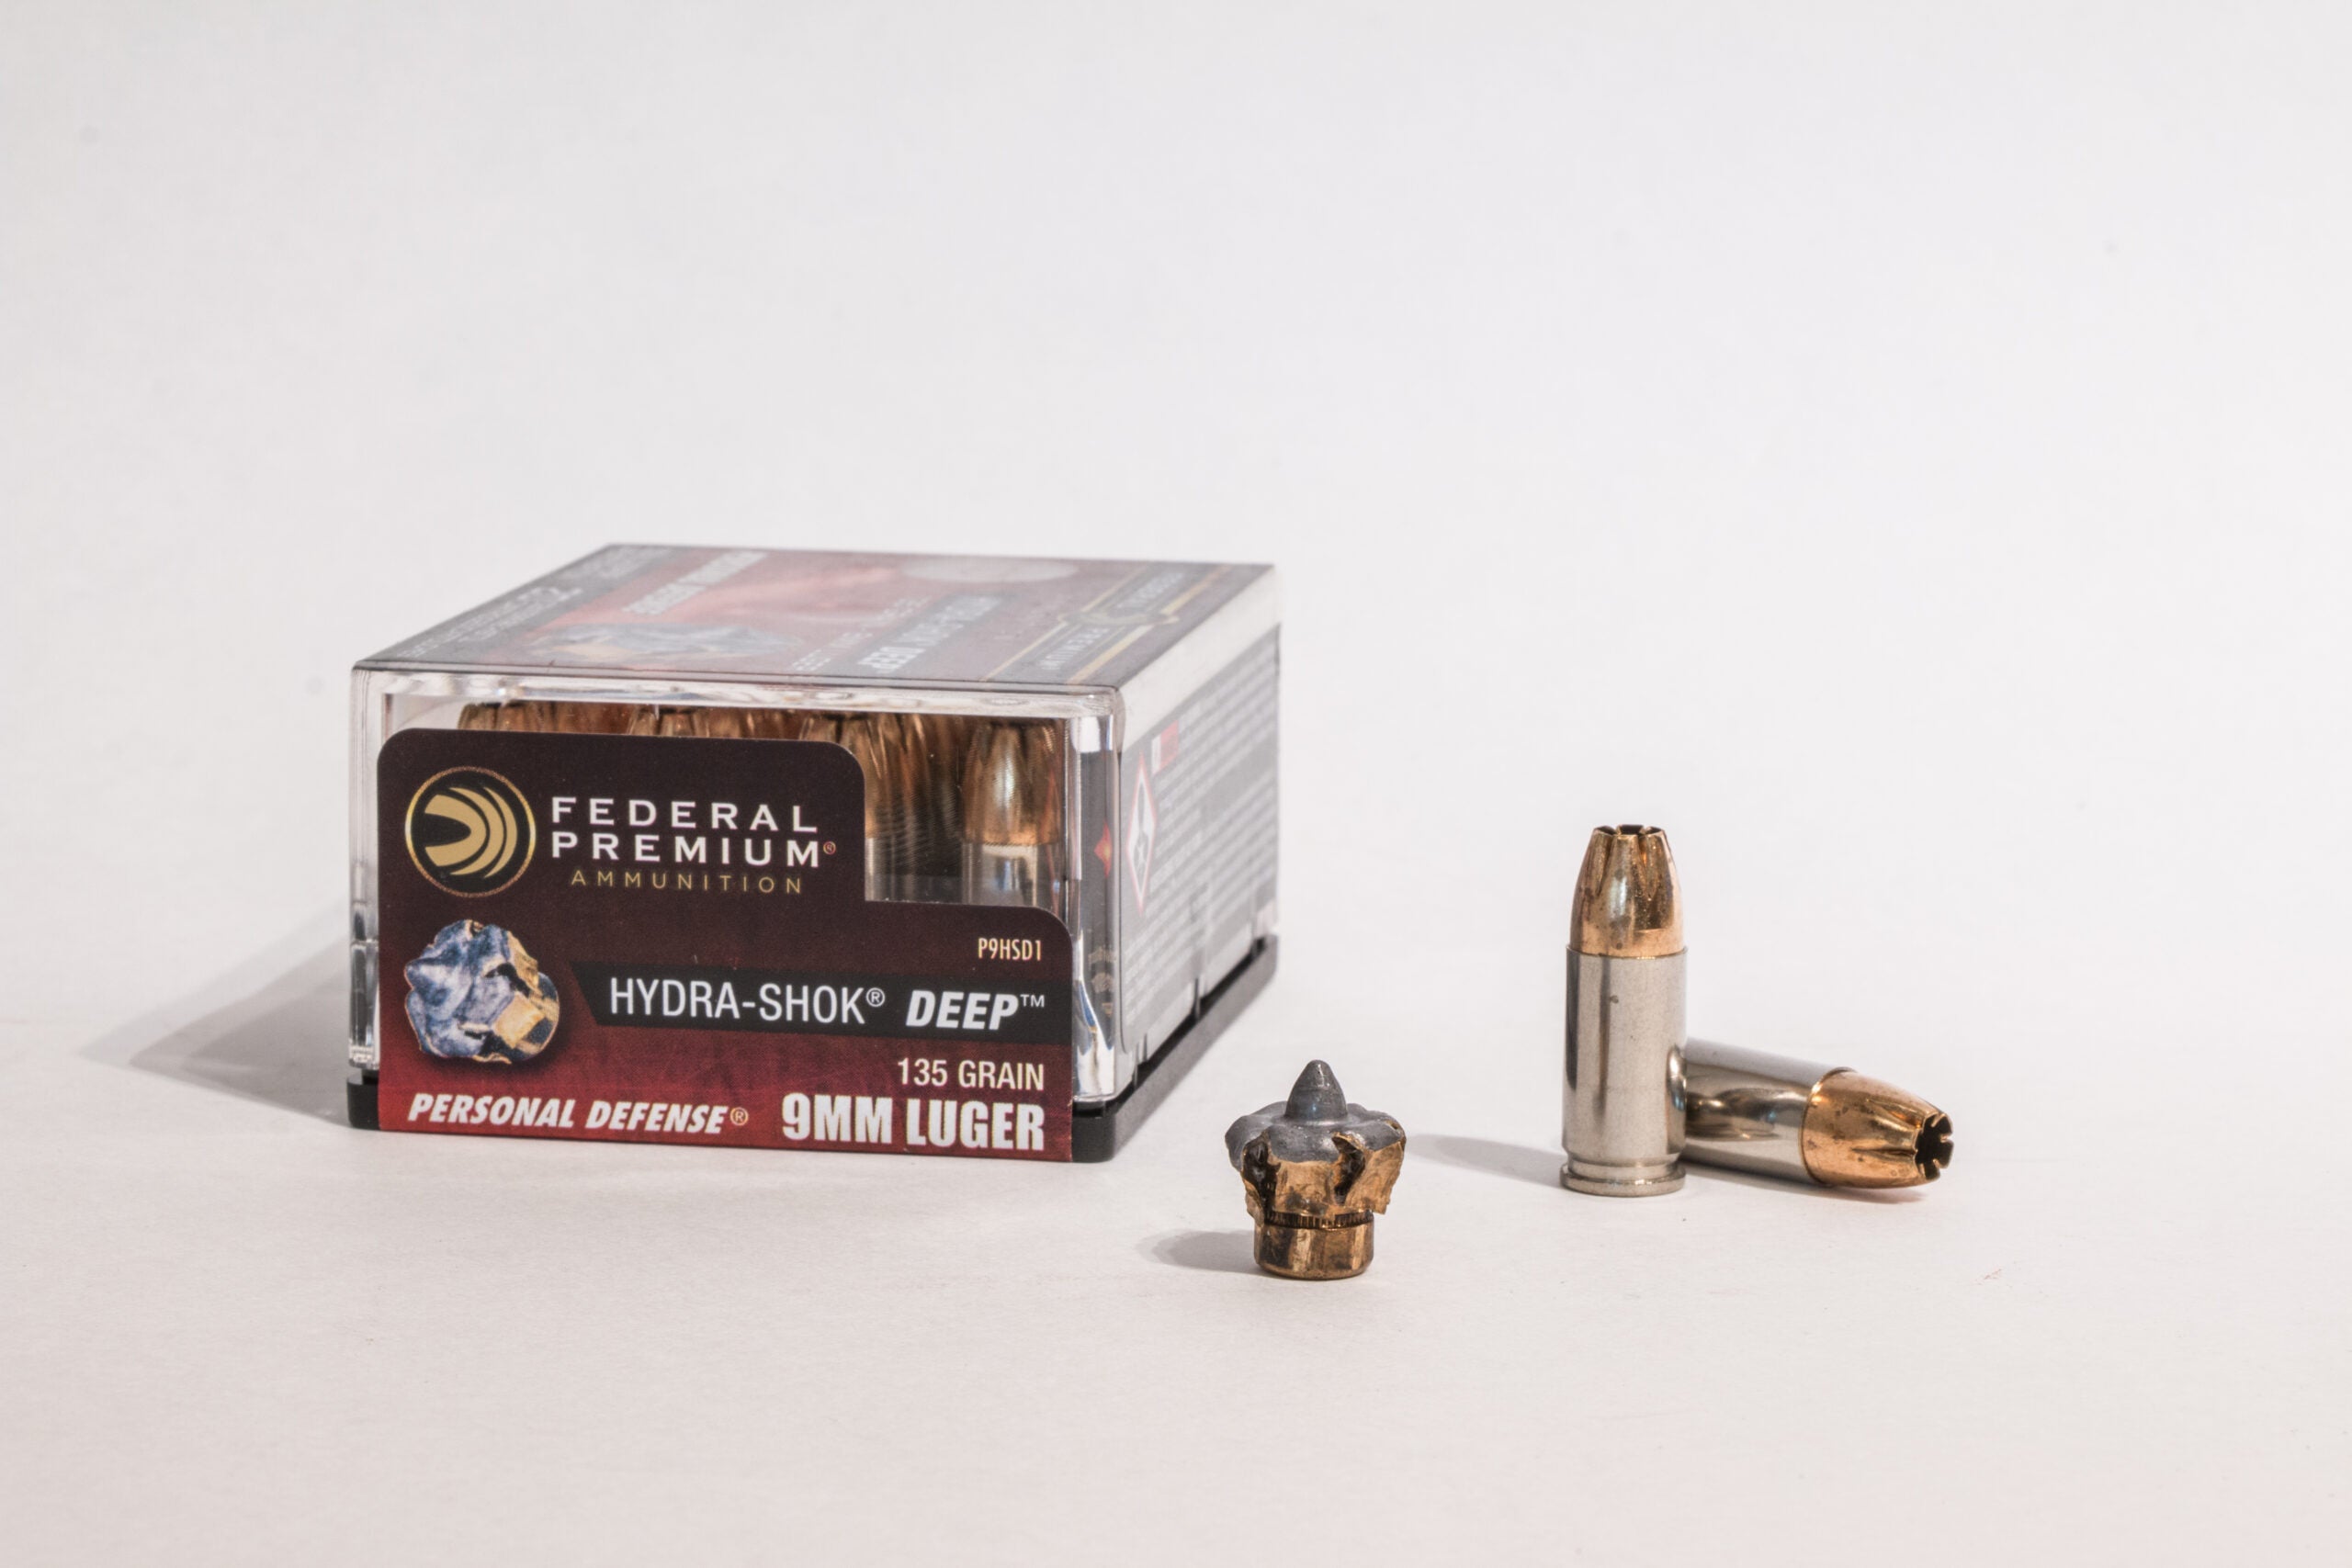 Box of 9mm Luger ammo with one fired bullet and two loose cartridges on white background